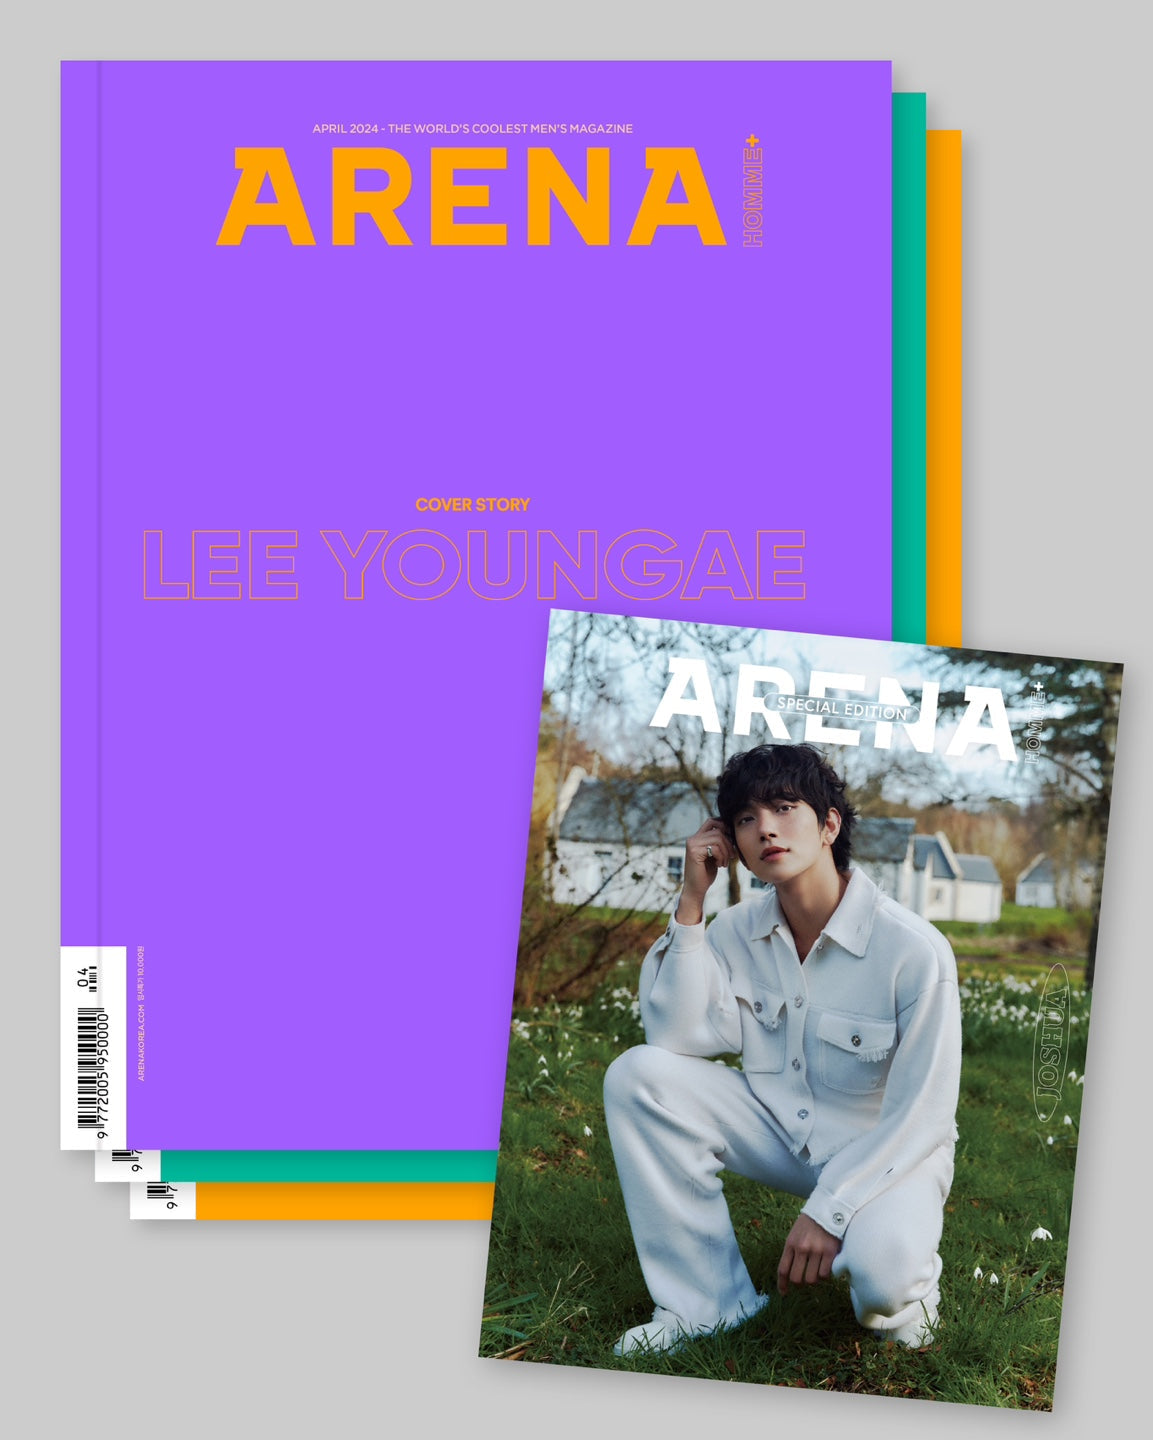 ARENA HOMME MAGAZINE COVER LEE YOUNG AE - SEVENTEEN JOSHUA Content 2024 APRIL ISSUE